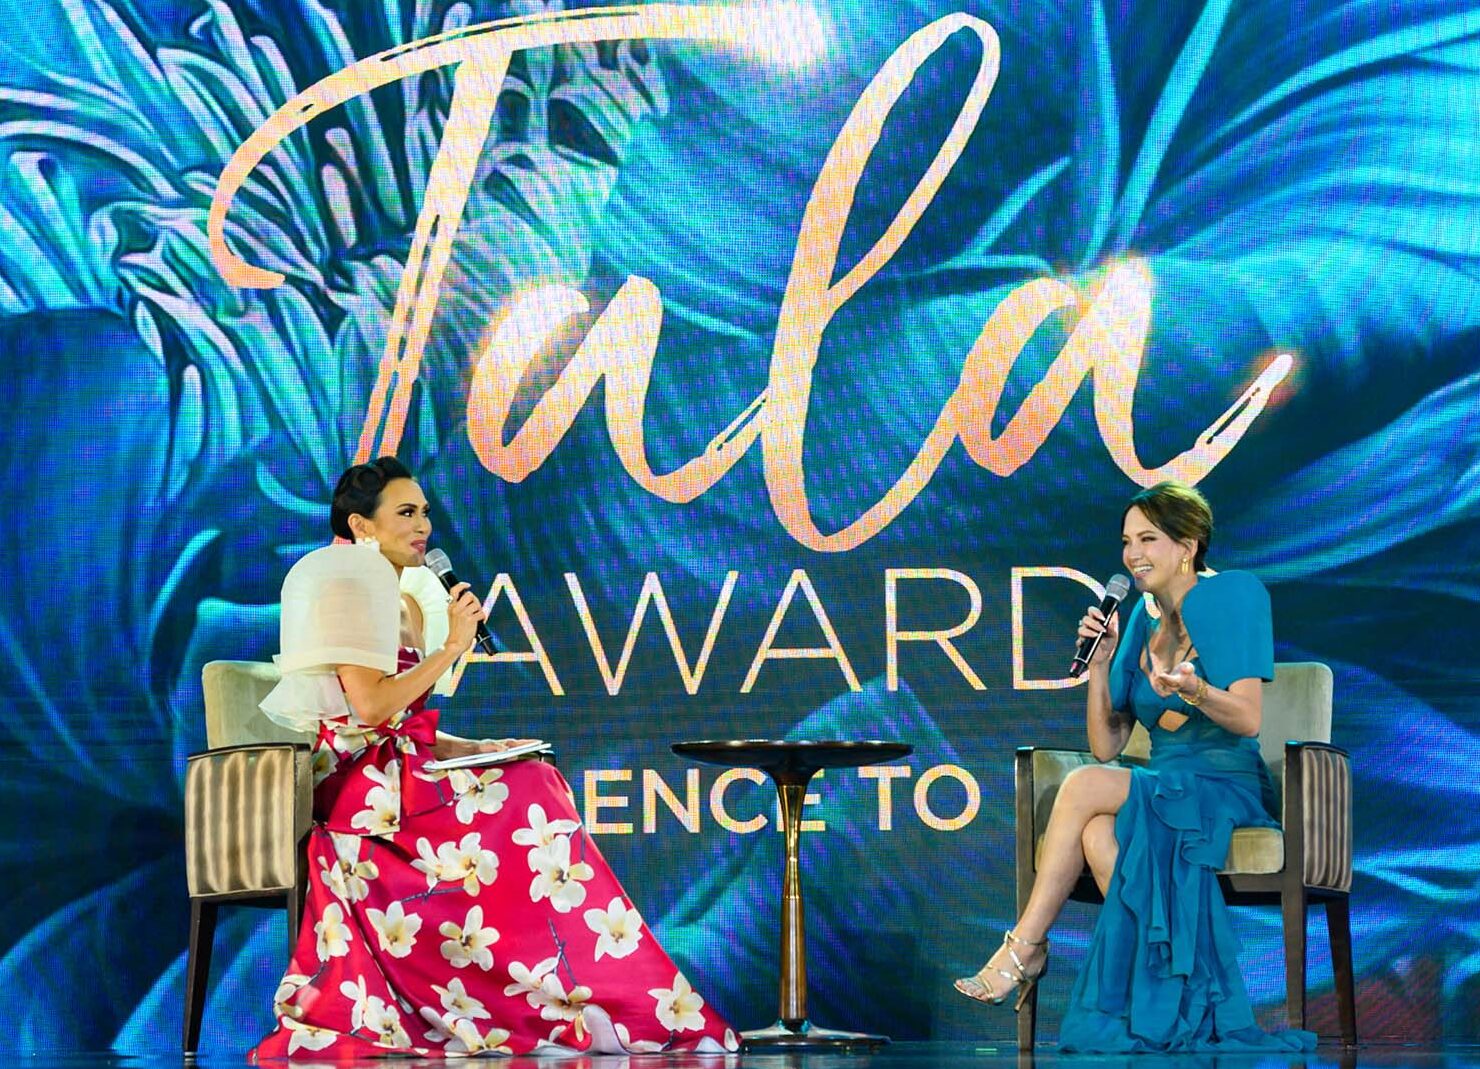 Issa Litton and Ellen Adarna chat on stage about being Ultherapy®'s brand ambassador